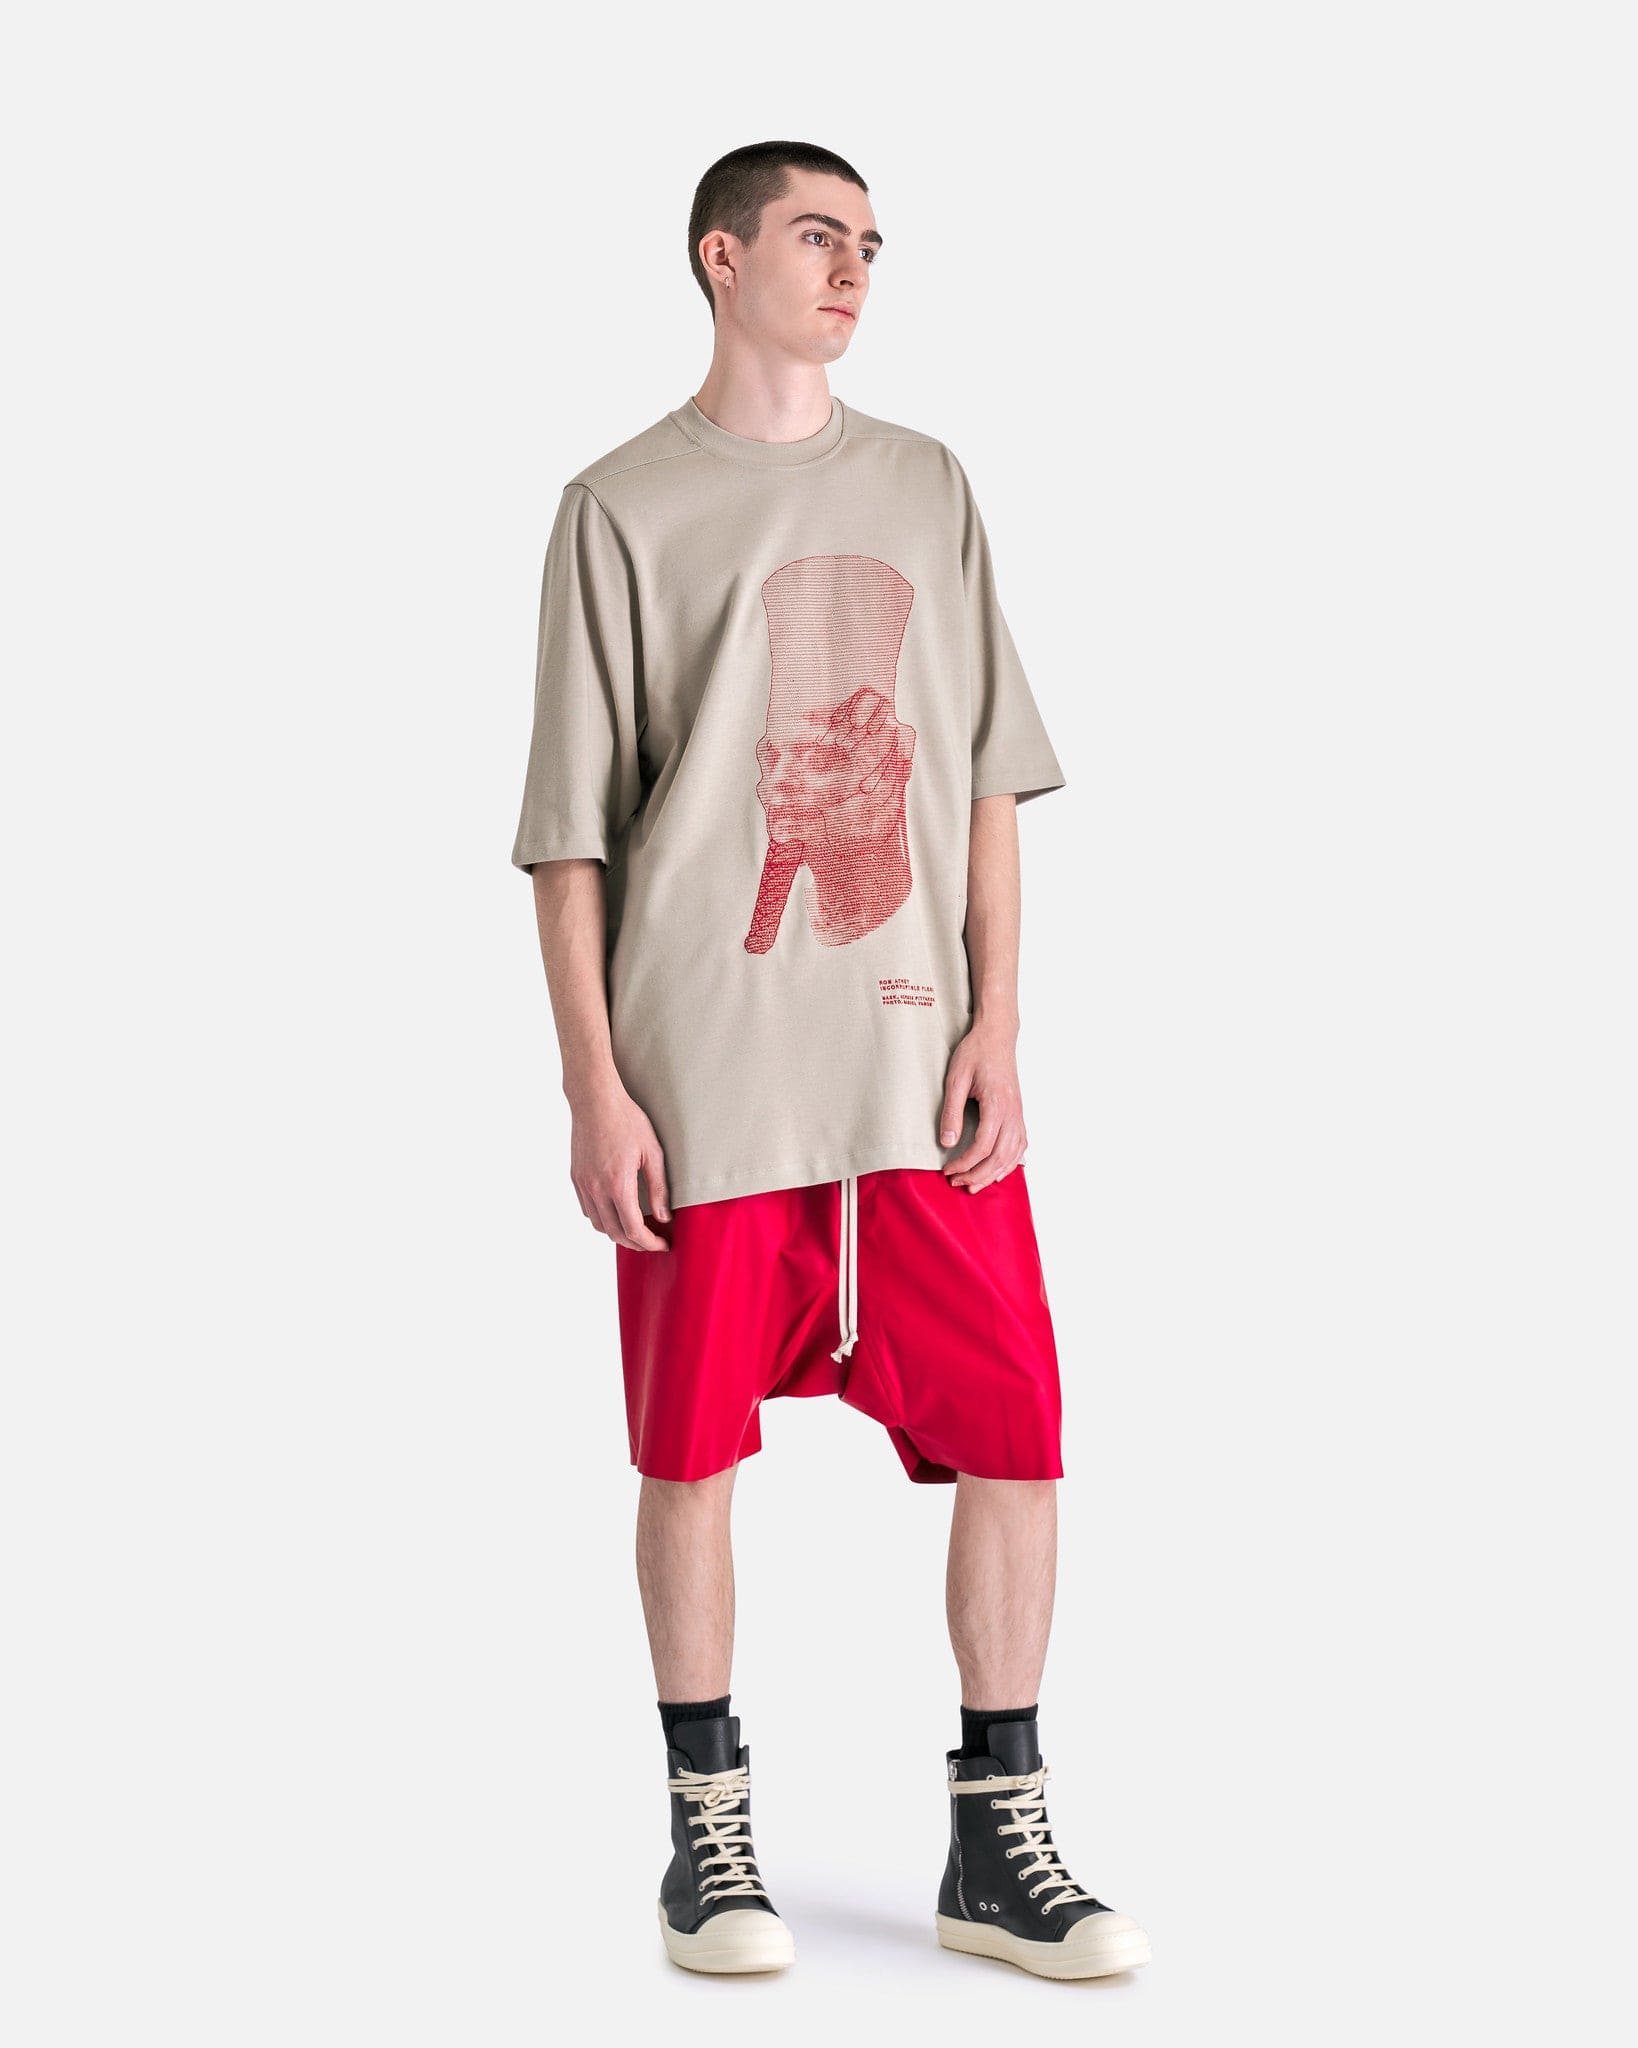 Rick Owens Men's Shorts Leather Rick's Pods in Cardinal Red